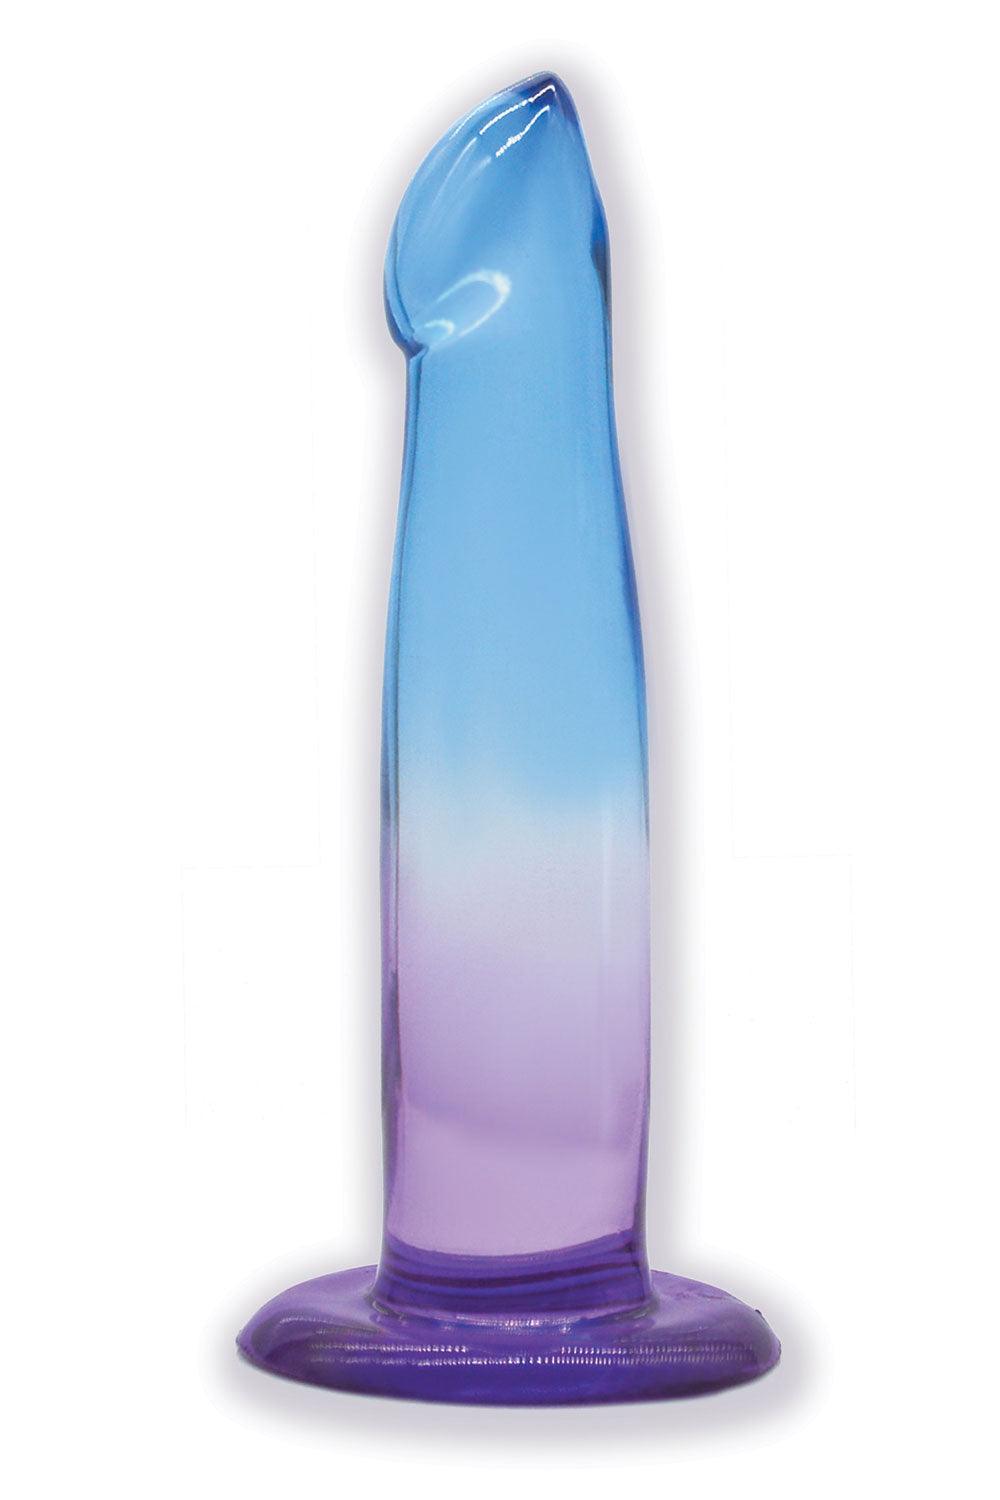 Shades, 6.25" G-Spot Jelly Tpr Gradient Dong - Blue and Purple - My Sex Toy Hub